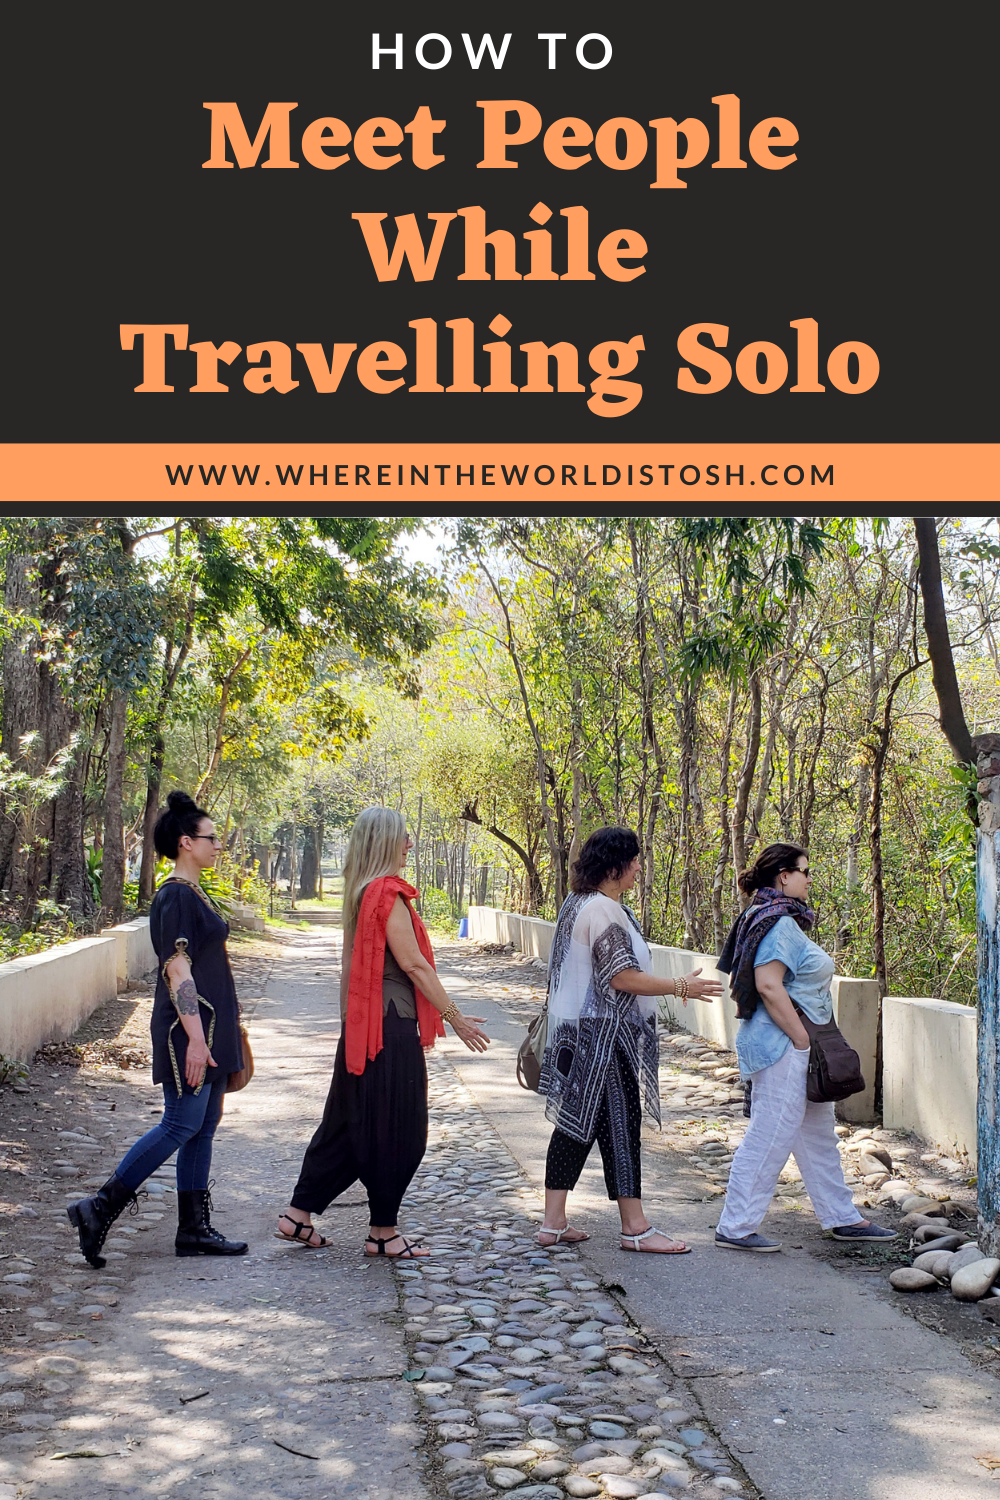 How To Meet People While Travelling Solo